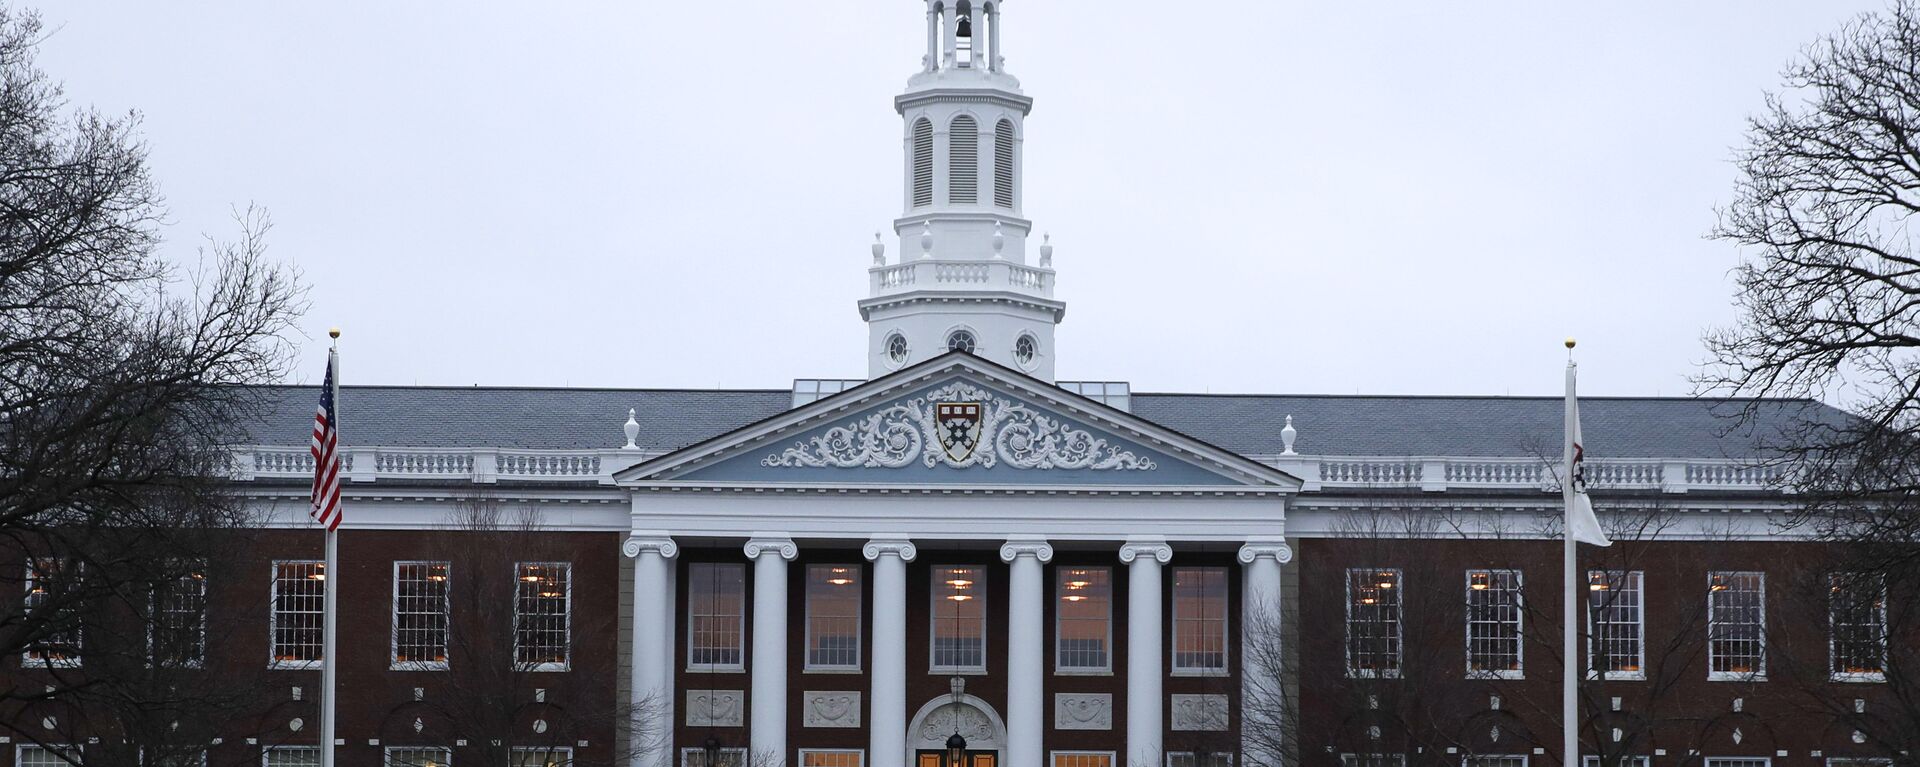 The Baker Library at the Harvard Business School on the campus of Harvard University in Cambridge, Mass., Tuesday, March 7, 2017 - Sputnik International, 1920, 02.12.2017